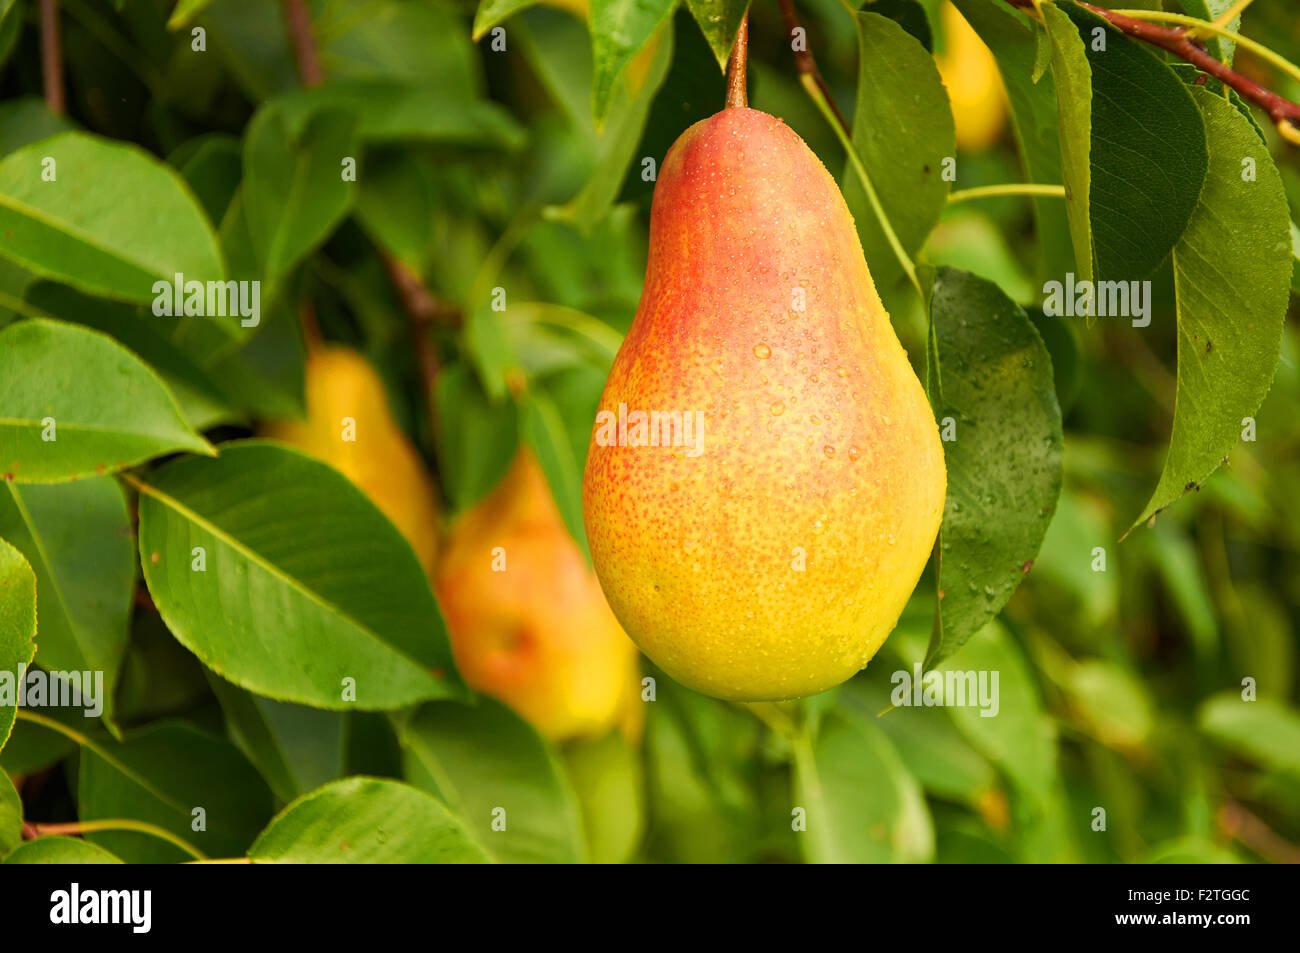 Big ripe red yellow pear fruit on the tree Stock Photo